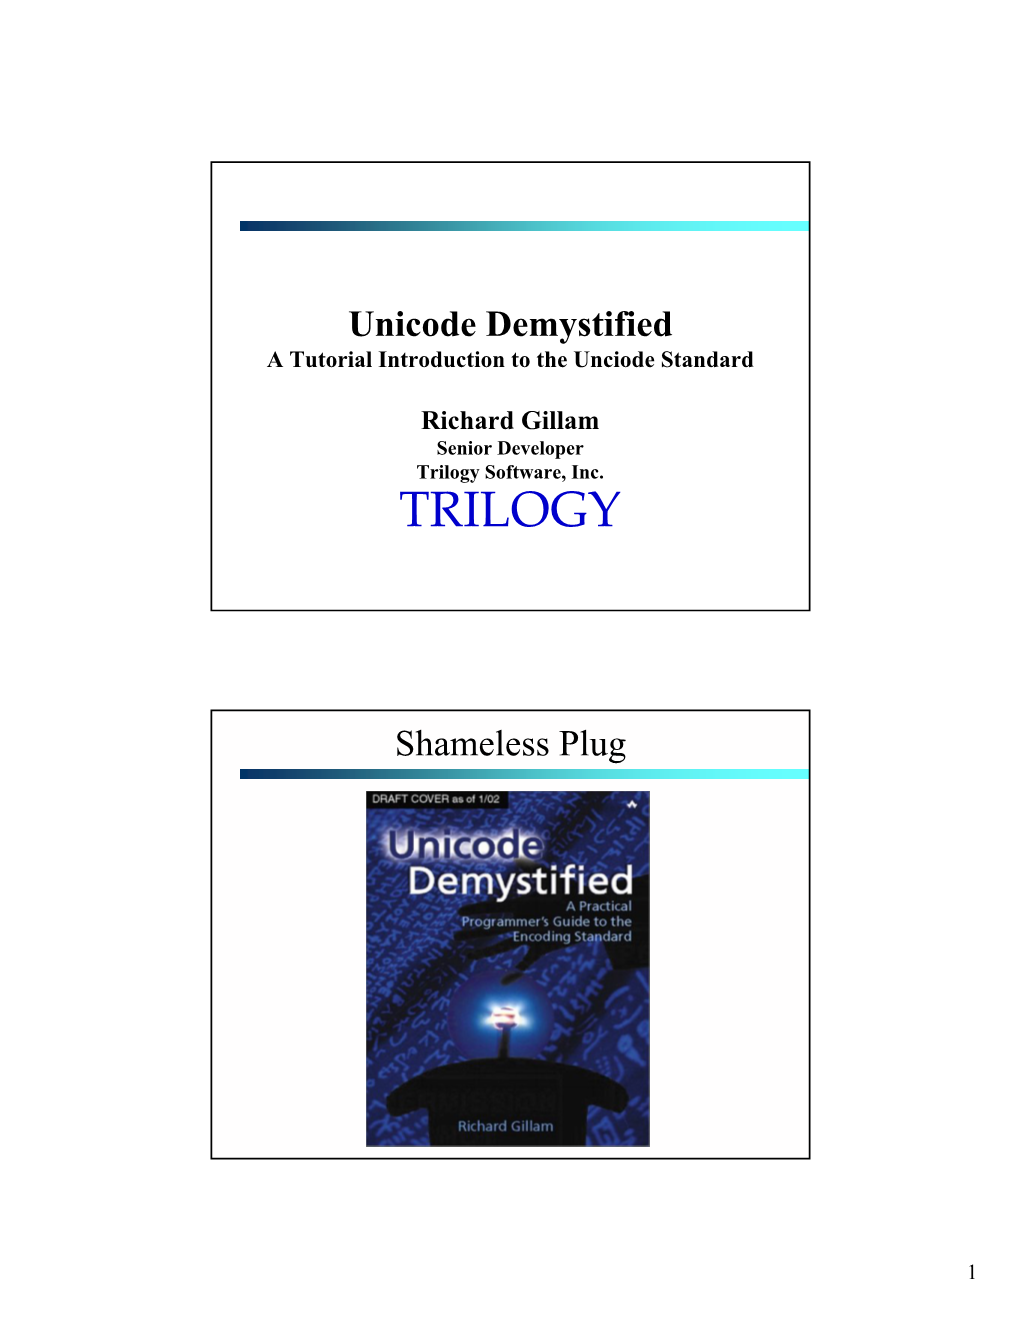 Unicode Demystified a Tutorial Introduction to the Unciode Standard